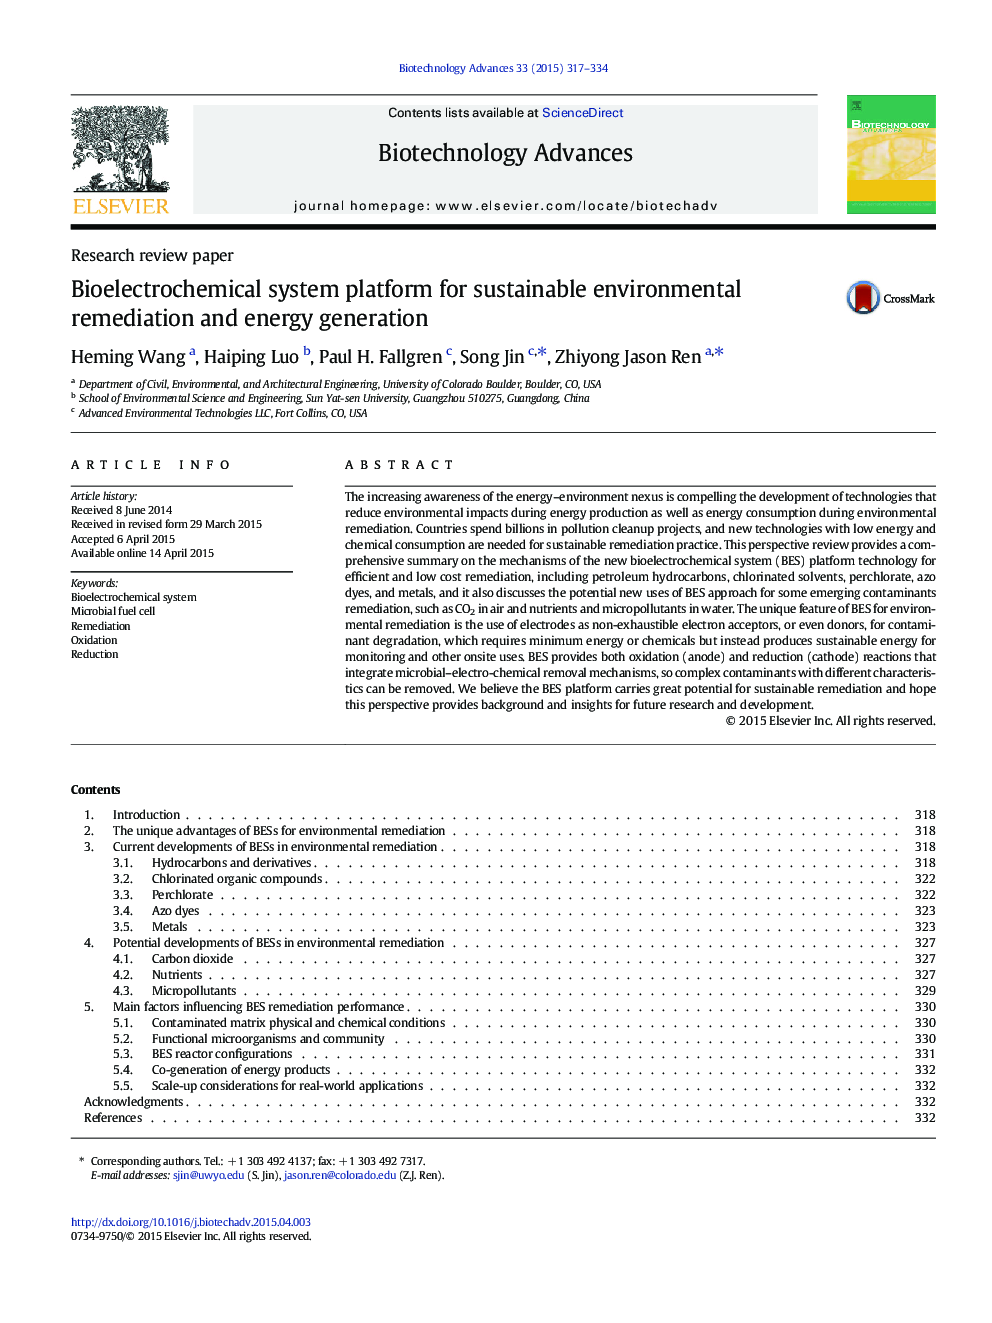 Bioelectrochemical system platform for sustainable environmental remediation and energy generation